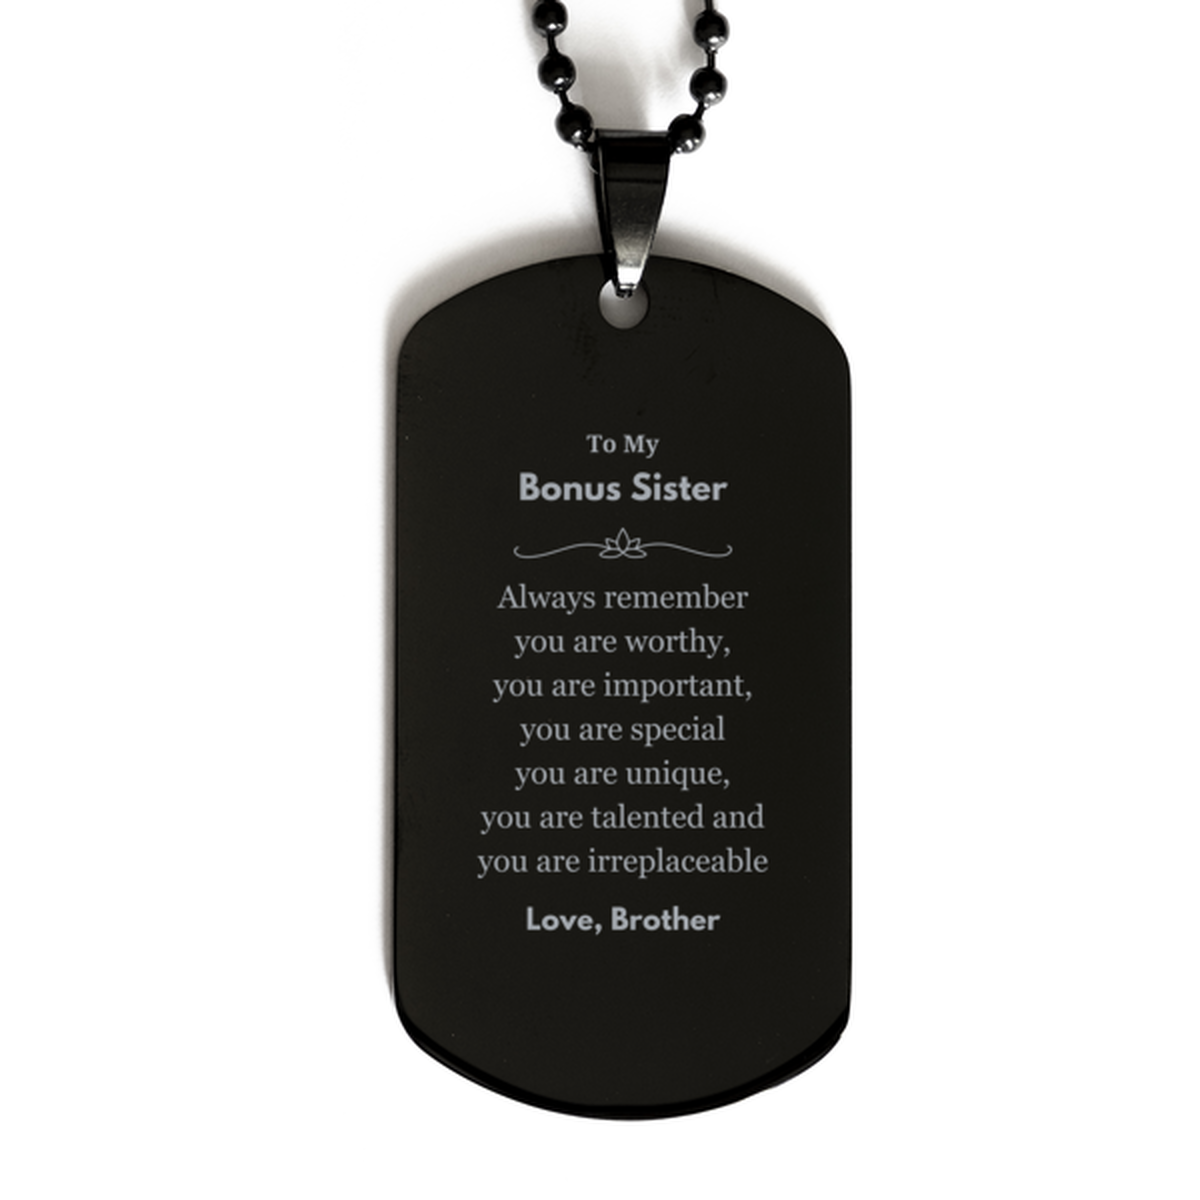 Bonus Sister Birthday Gifts from Brother, Inspirational Black Dog Tag for Bonus Sister Christmas Graduation Gifts for Bonus Sister Always remember you are worthy, you are important. Love, Brother